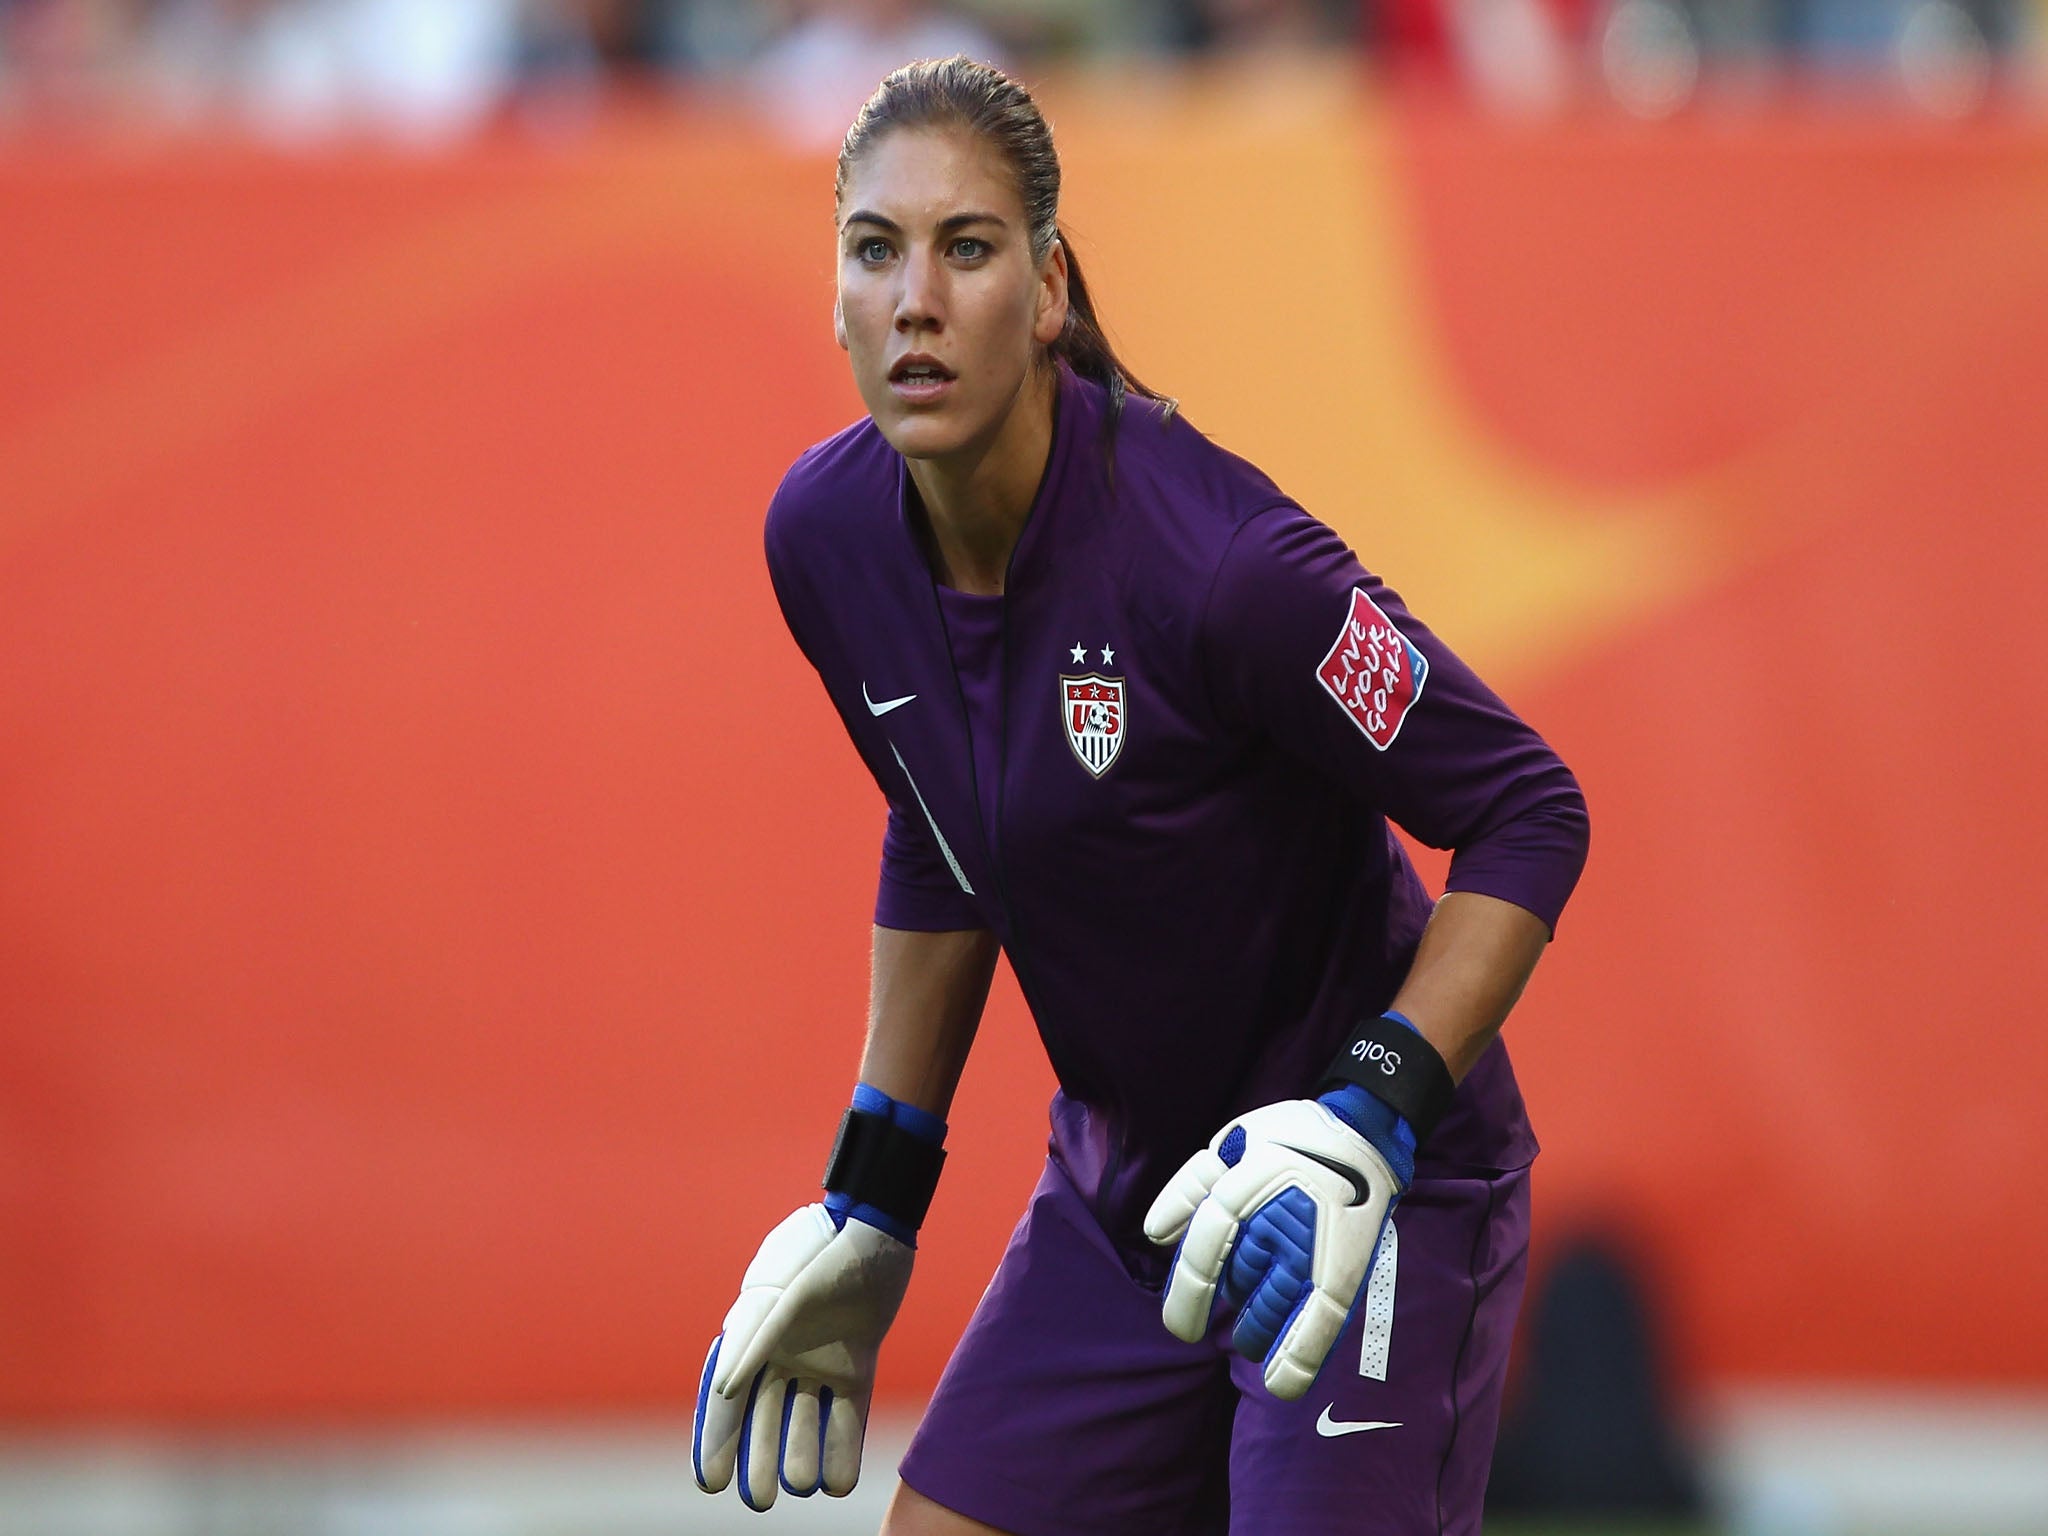 US Soccer goalkeeper Hope Solo has been suspended from the team for 30 days after an incident with California police.